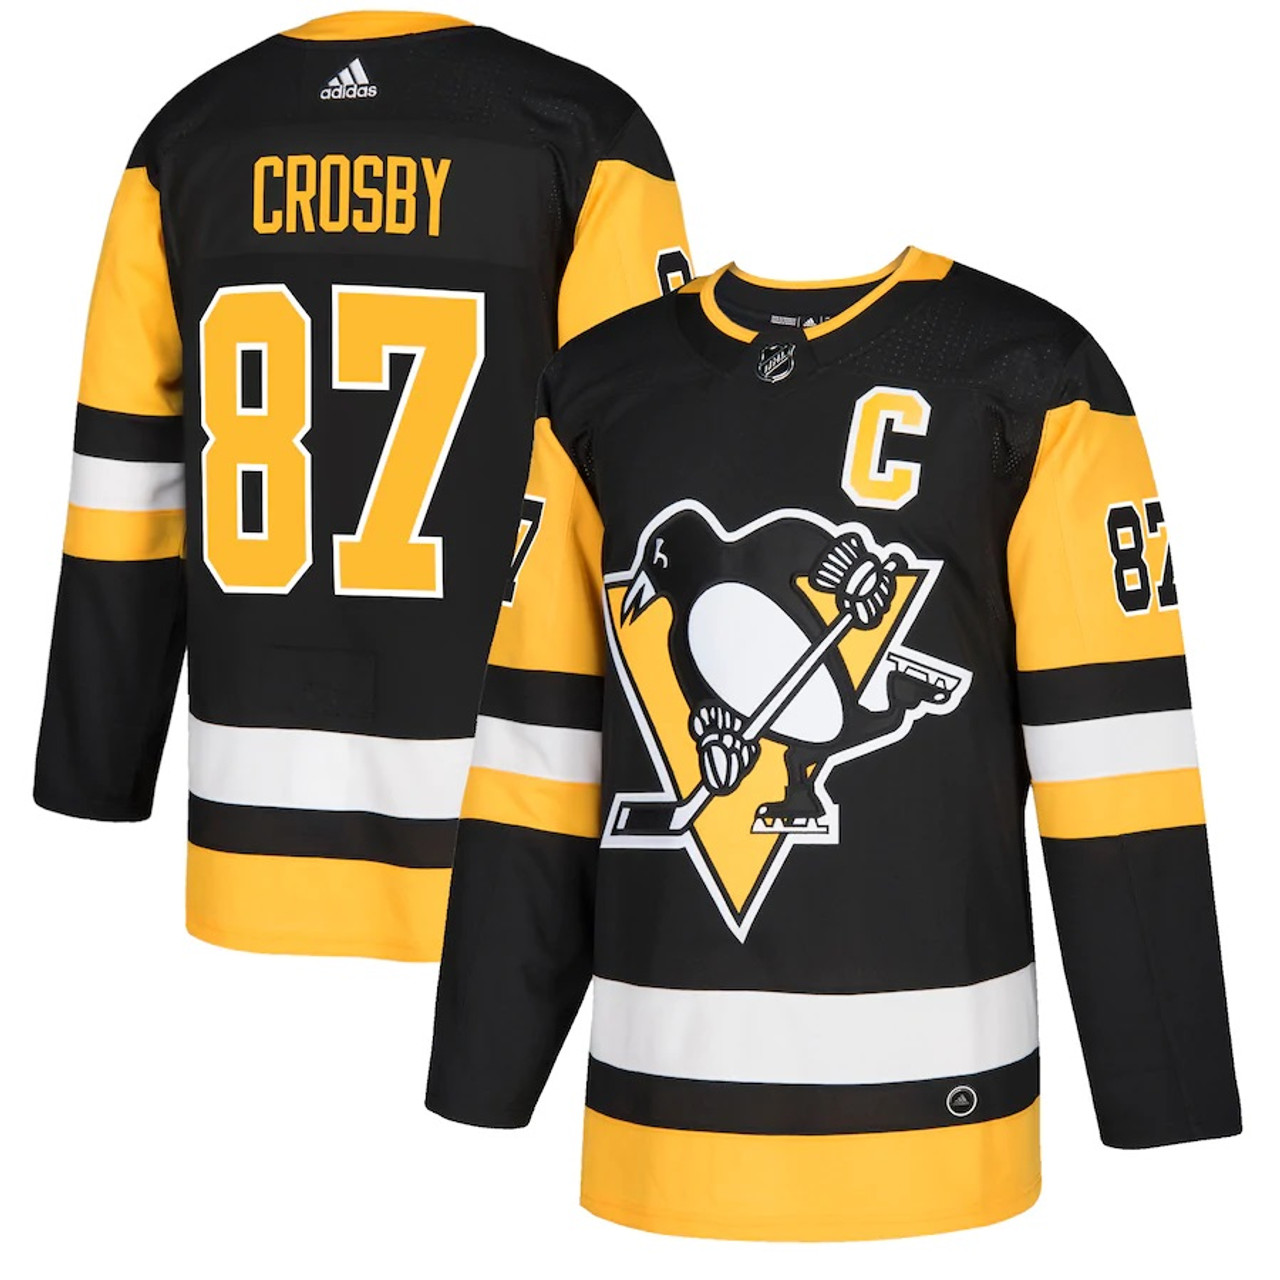 ADIDAS Pittsburgh Penguins 2020 All Star Jersey St. Louis Auth Mens Nwt  Size 44